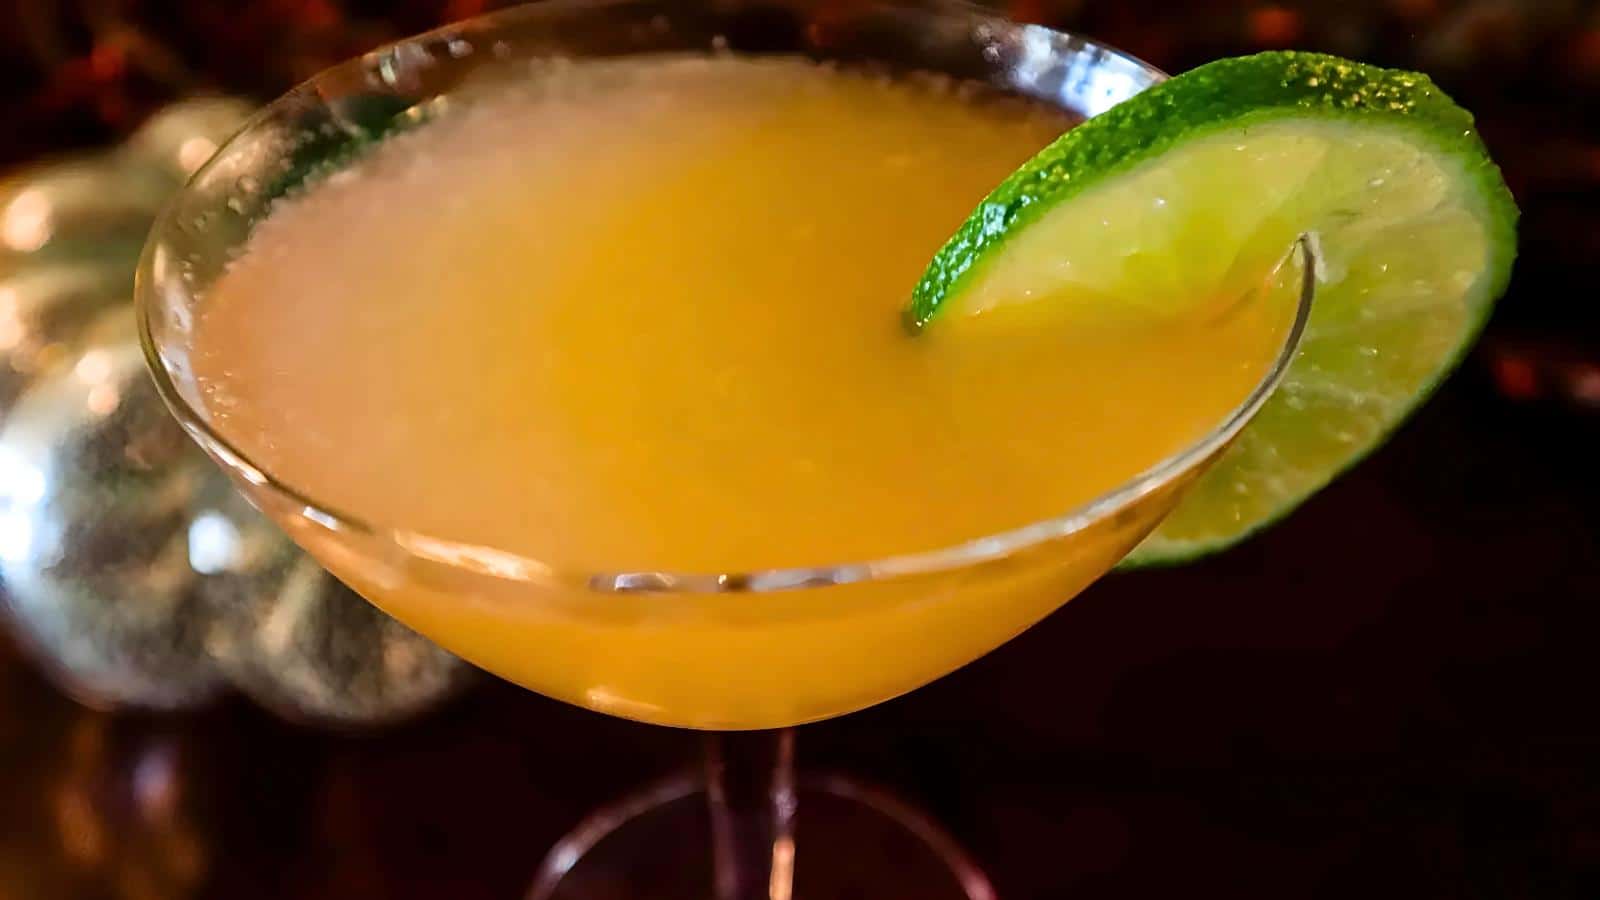 <p>Spice up your summer with The Soul Train cocktail. This unique mix of tequila, cardamom, and citrus is bold and flavorful. It’s a must-try summer cocktail for adventurous drinkers.<br><strong>Get the Recipe: </strong><a href="https://notentirelyaverage.com/the-soul-train-a-tequila-and-cardamom-cocktail/?utm_source=msn&utm_medium=page&utm_campaign=msn">The Soul Train, A Tequila and Cardamom Cocktail</a></p>